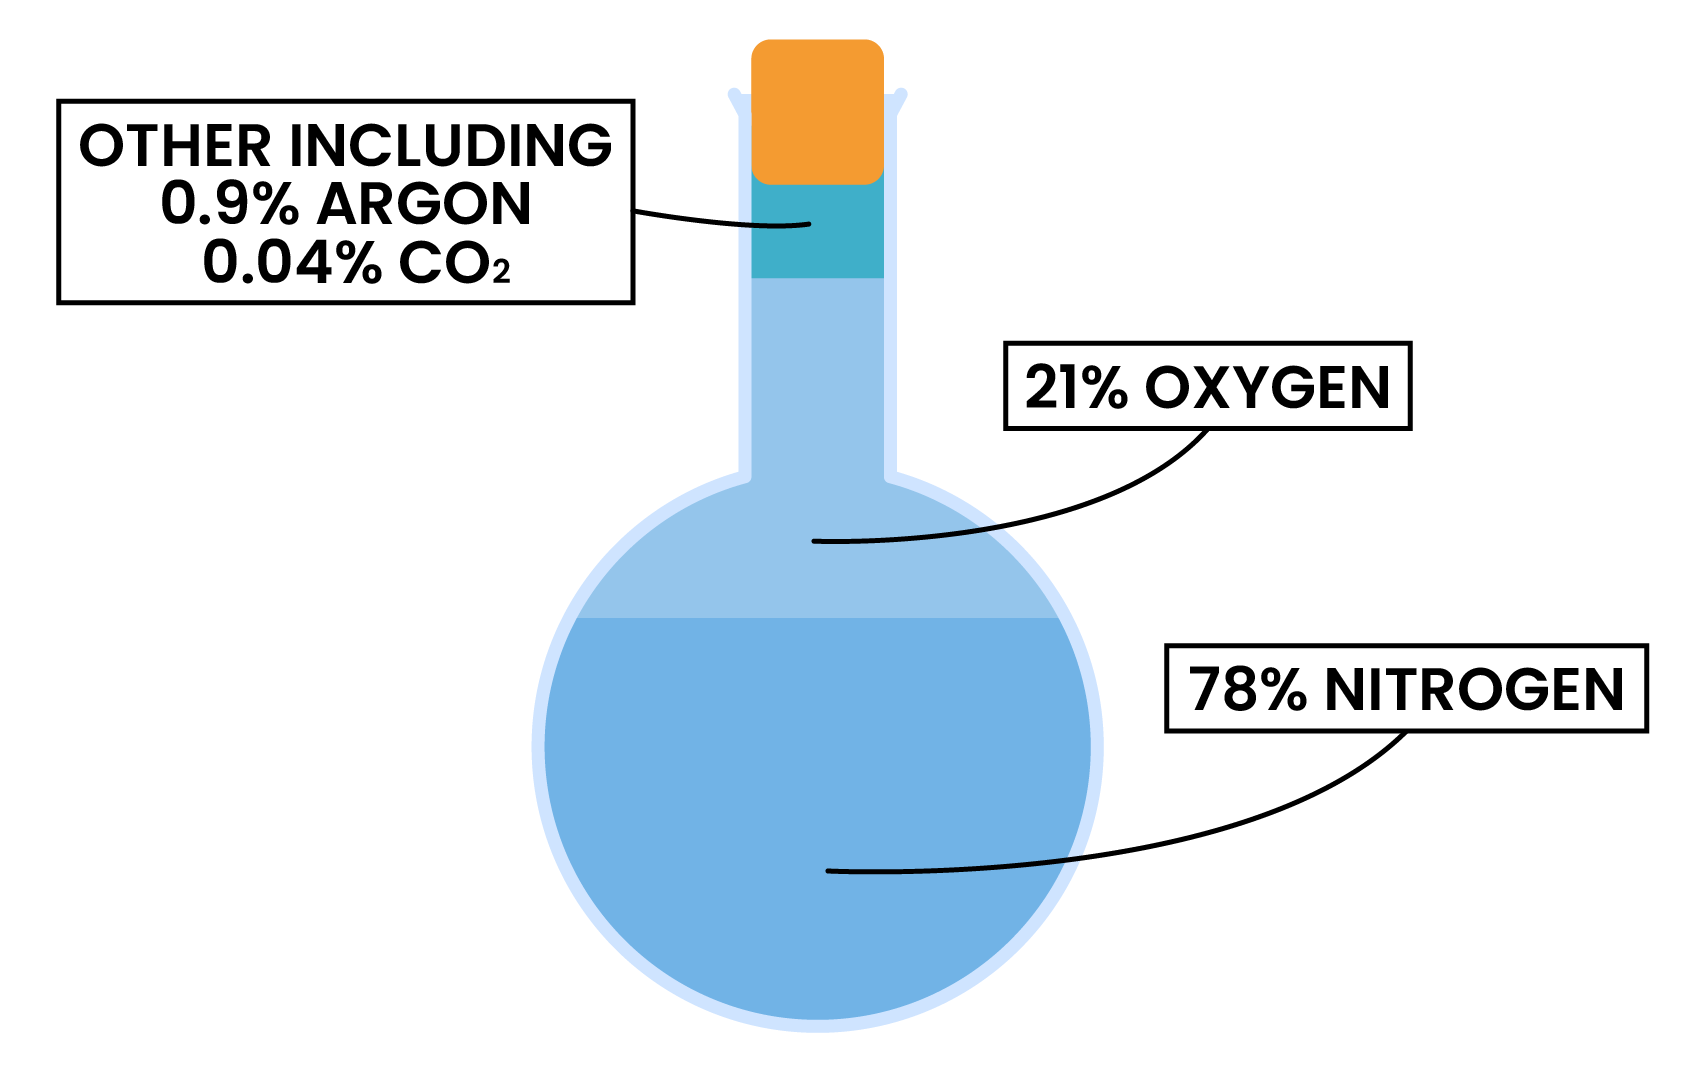 edexcel_igcse_chemistry_topic 12_gases in the atmosphere_001_composition of gases in the atmosphere diagram percentages